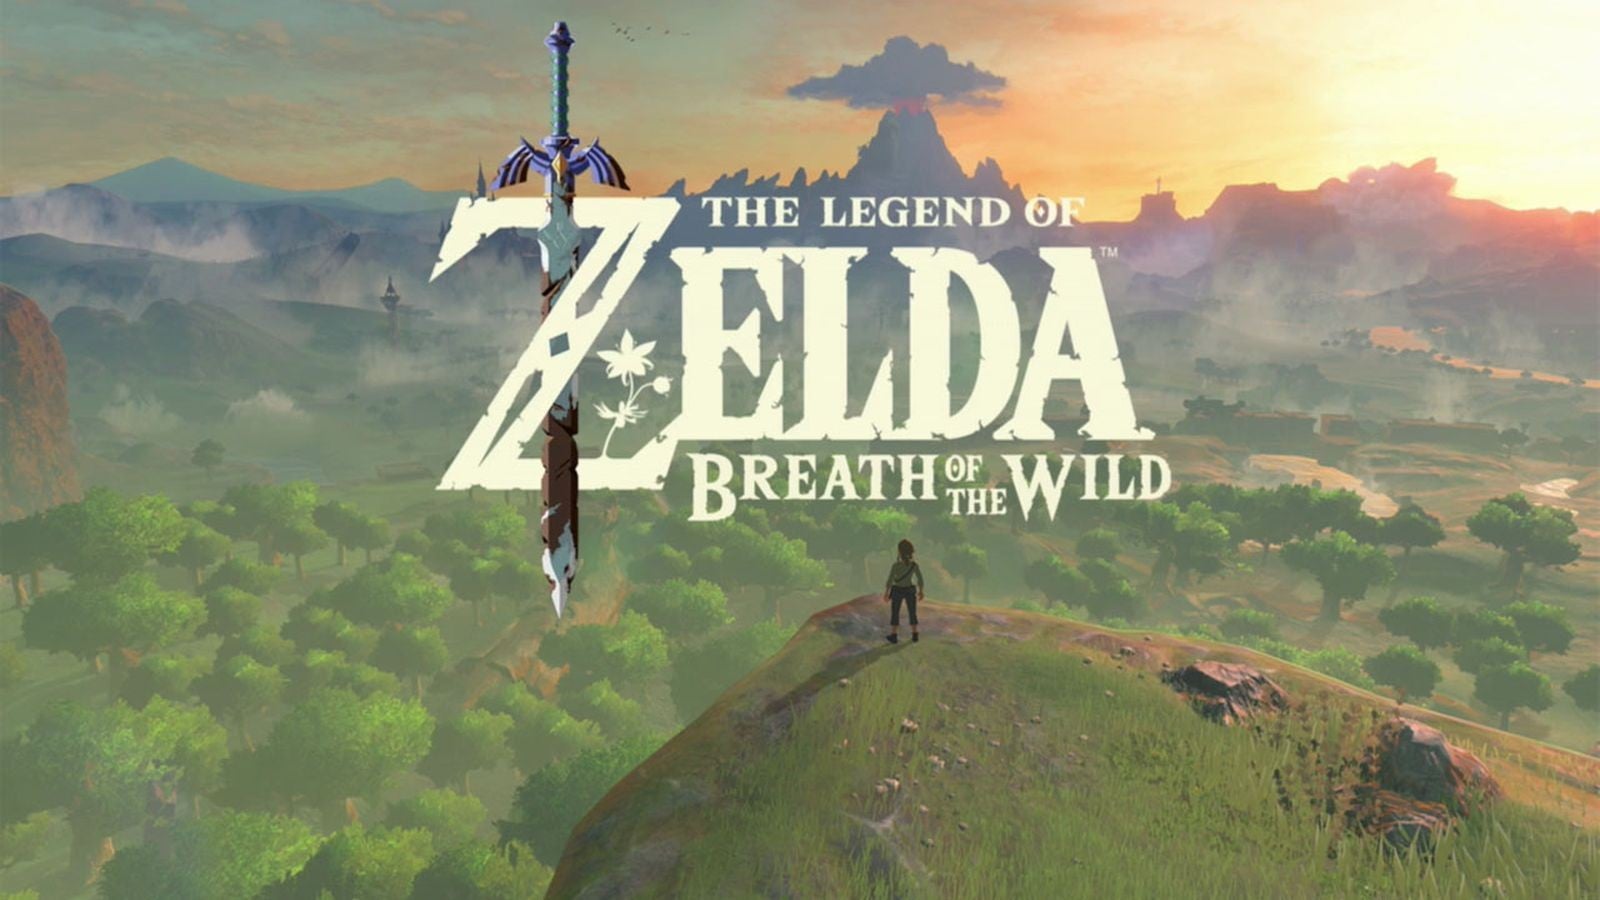 Image for Breath of the Wild breathed new life into Zelda | Why I Love